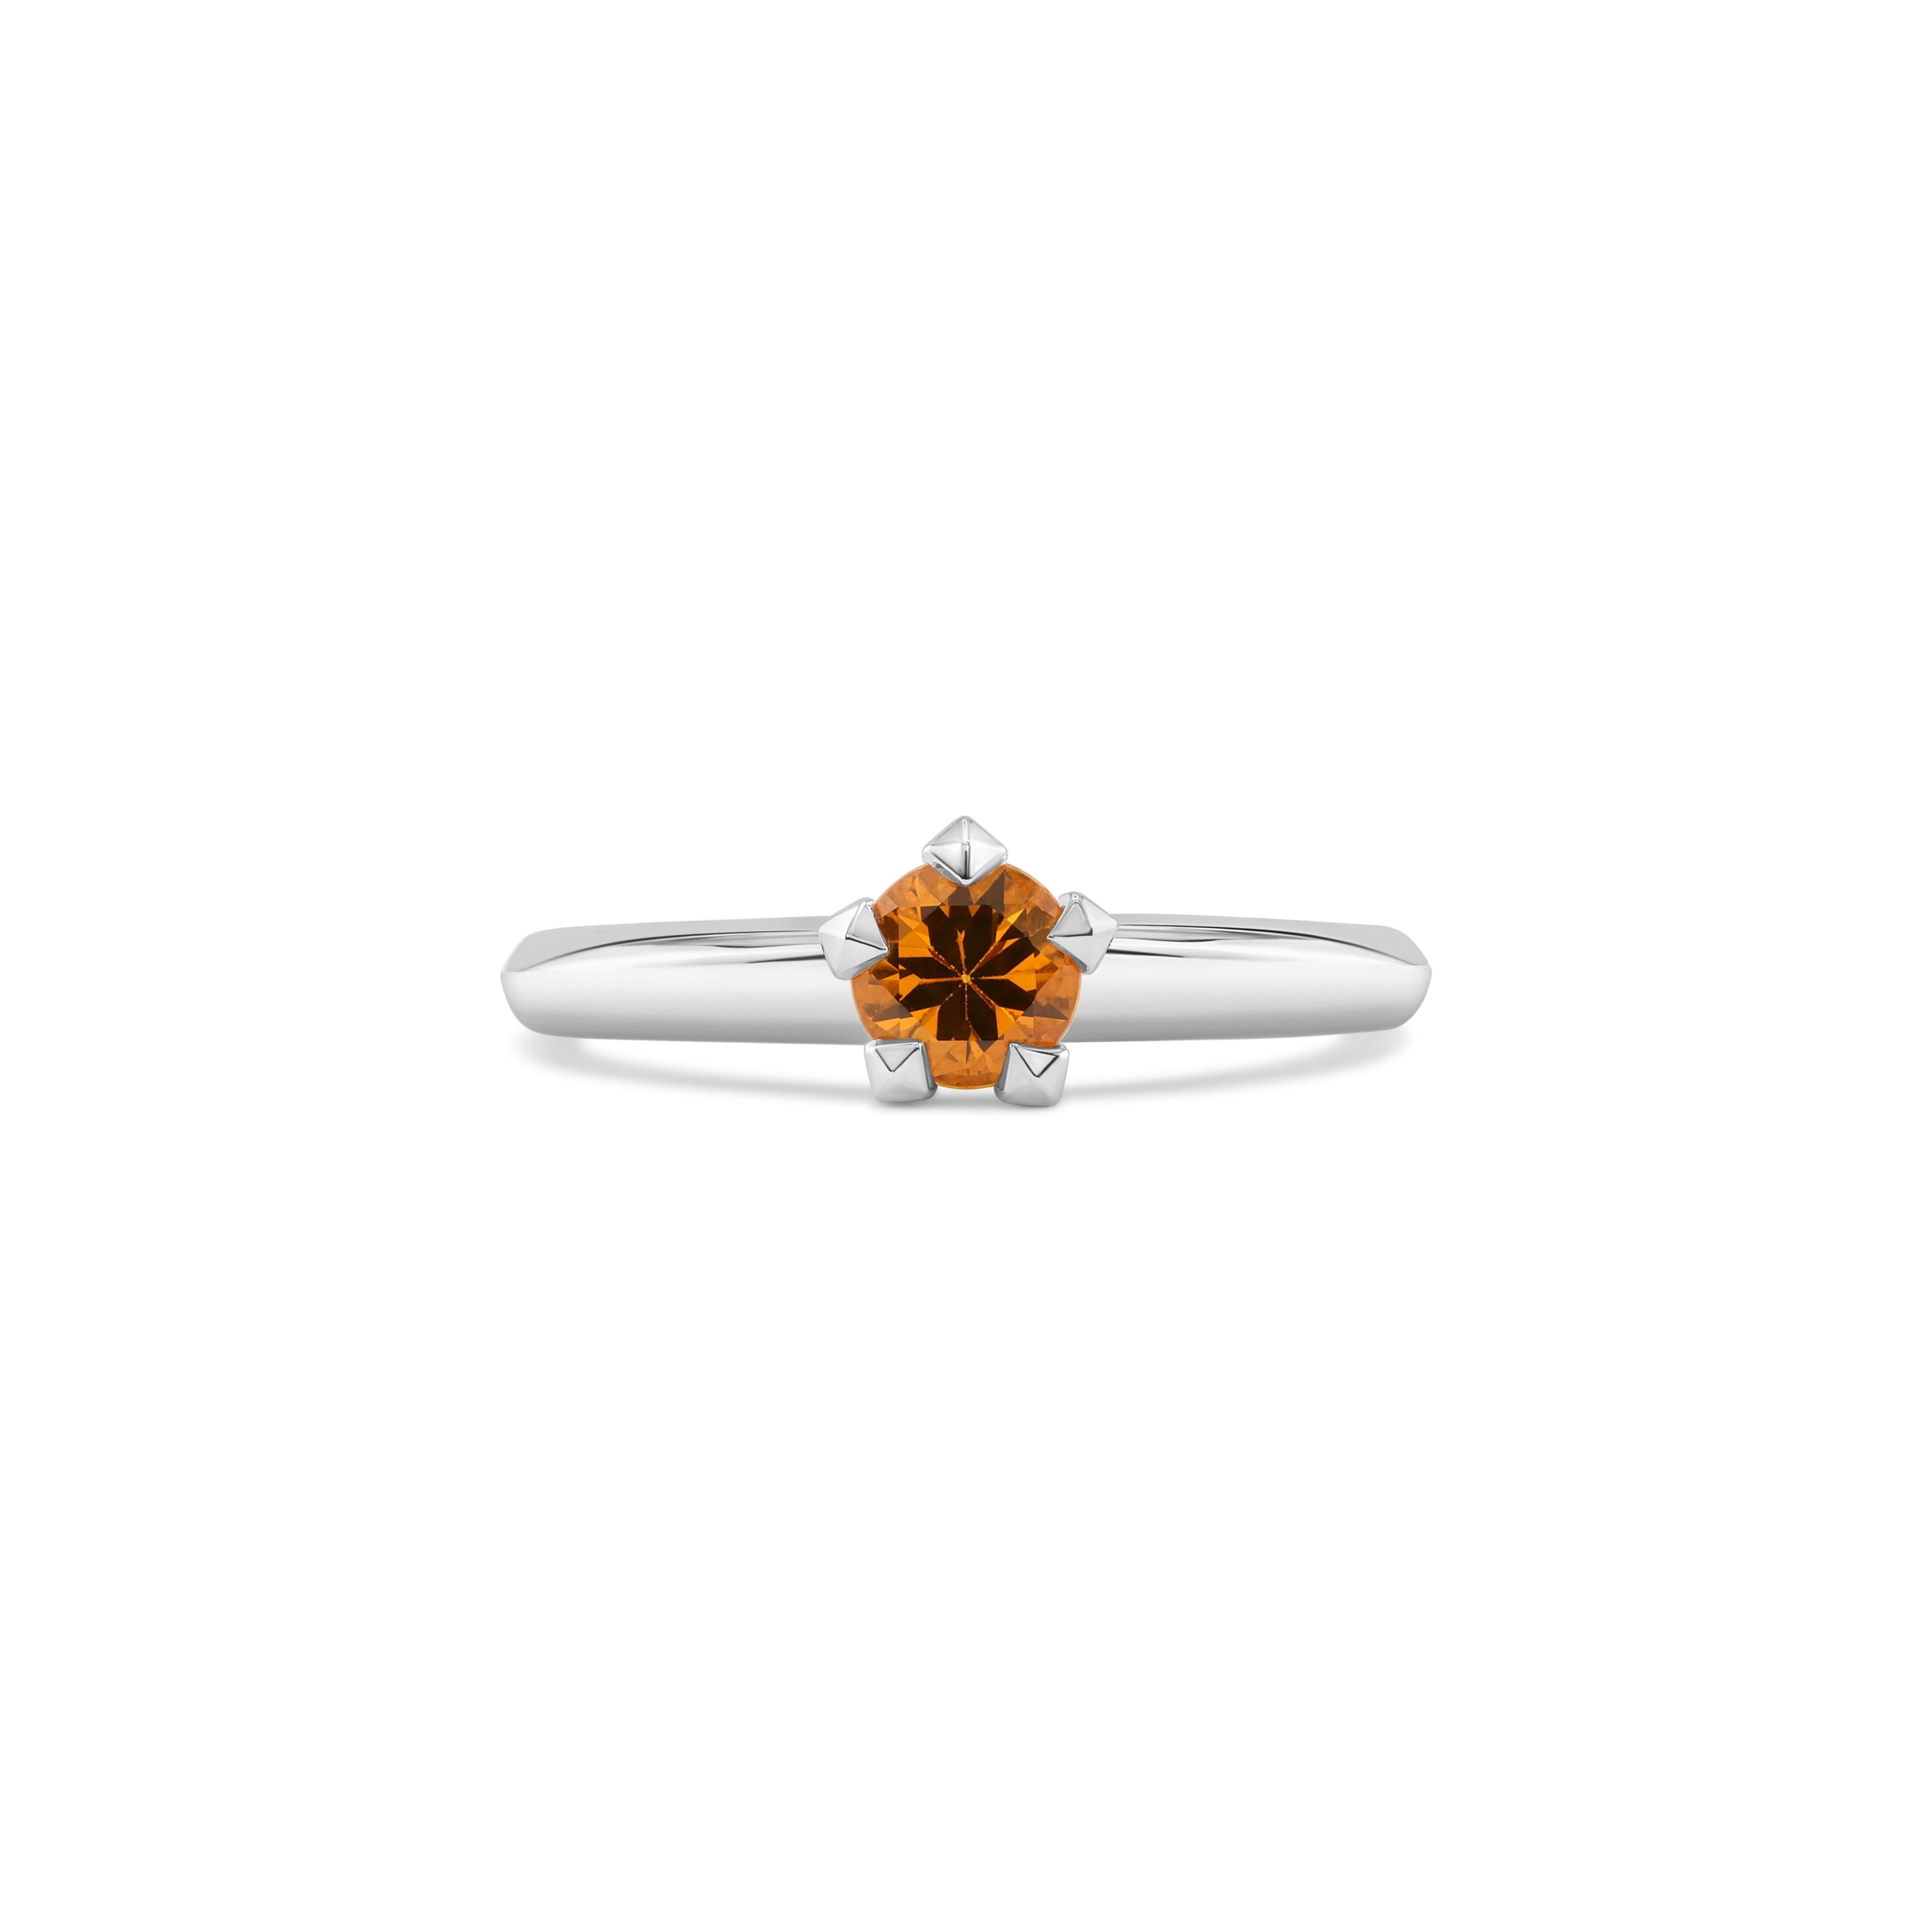 Made in luminous white gold, this yellow sapphire ring from MOISEIKIN captures the essence of starlight with its delicate design and detail.
A radiant 0.68ct central yellow sapphire, a dazzling beacon of warmth and light, is cradled within star-like